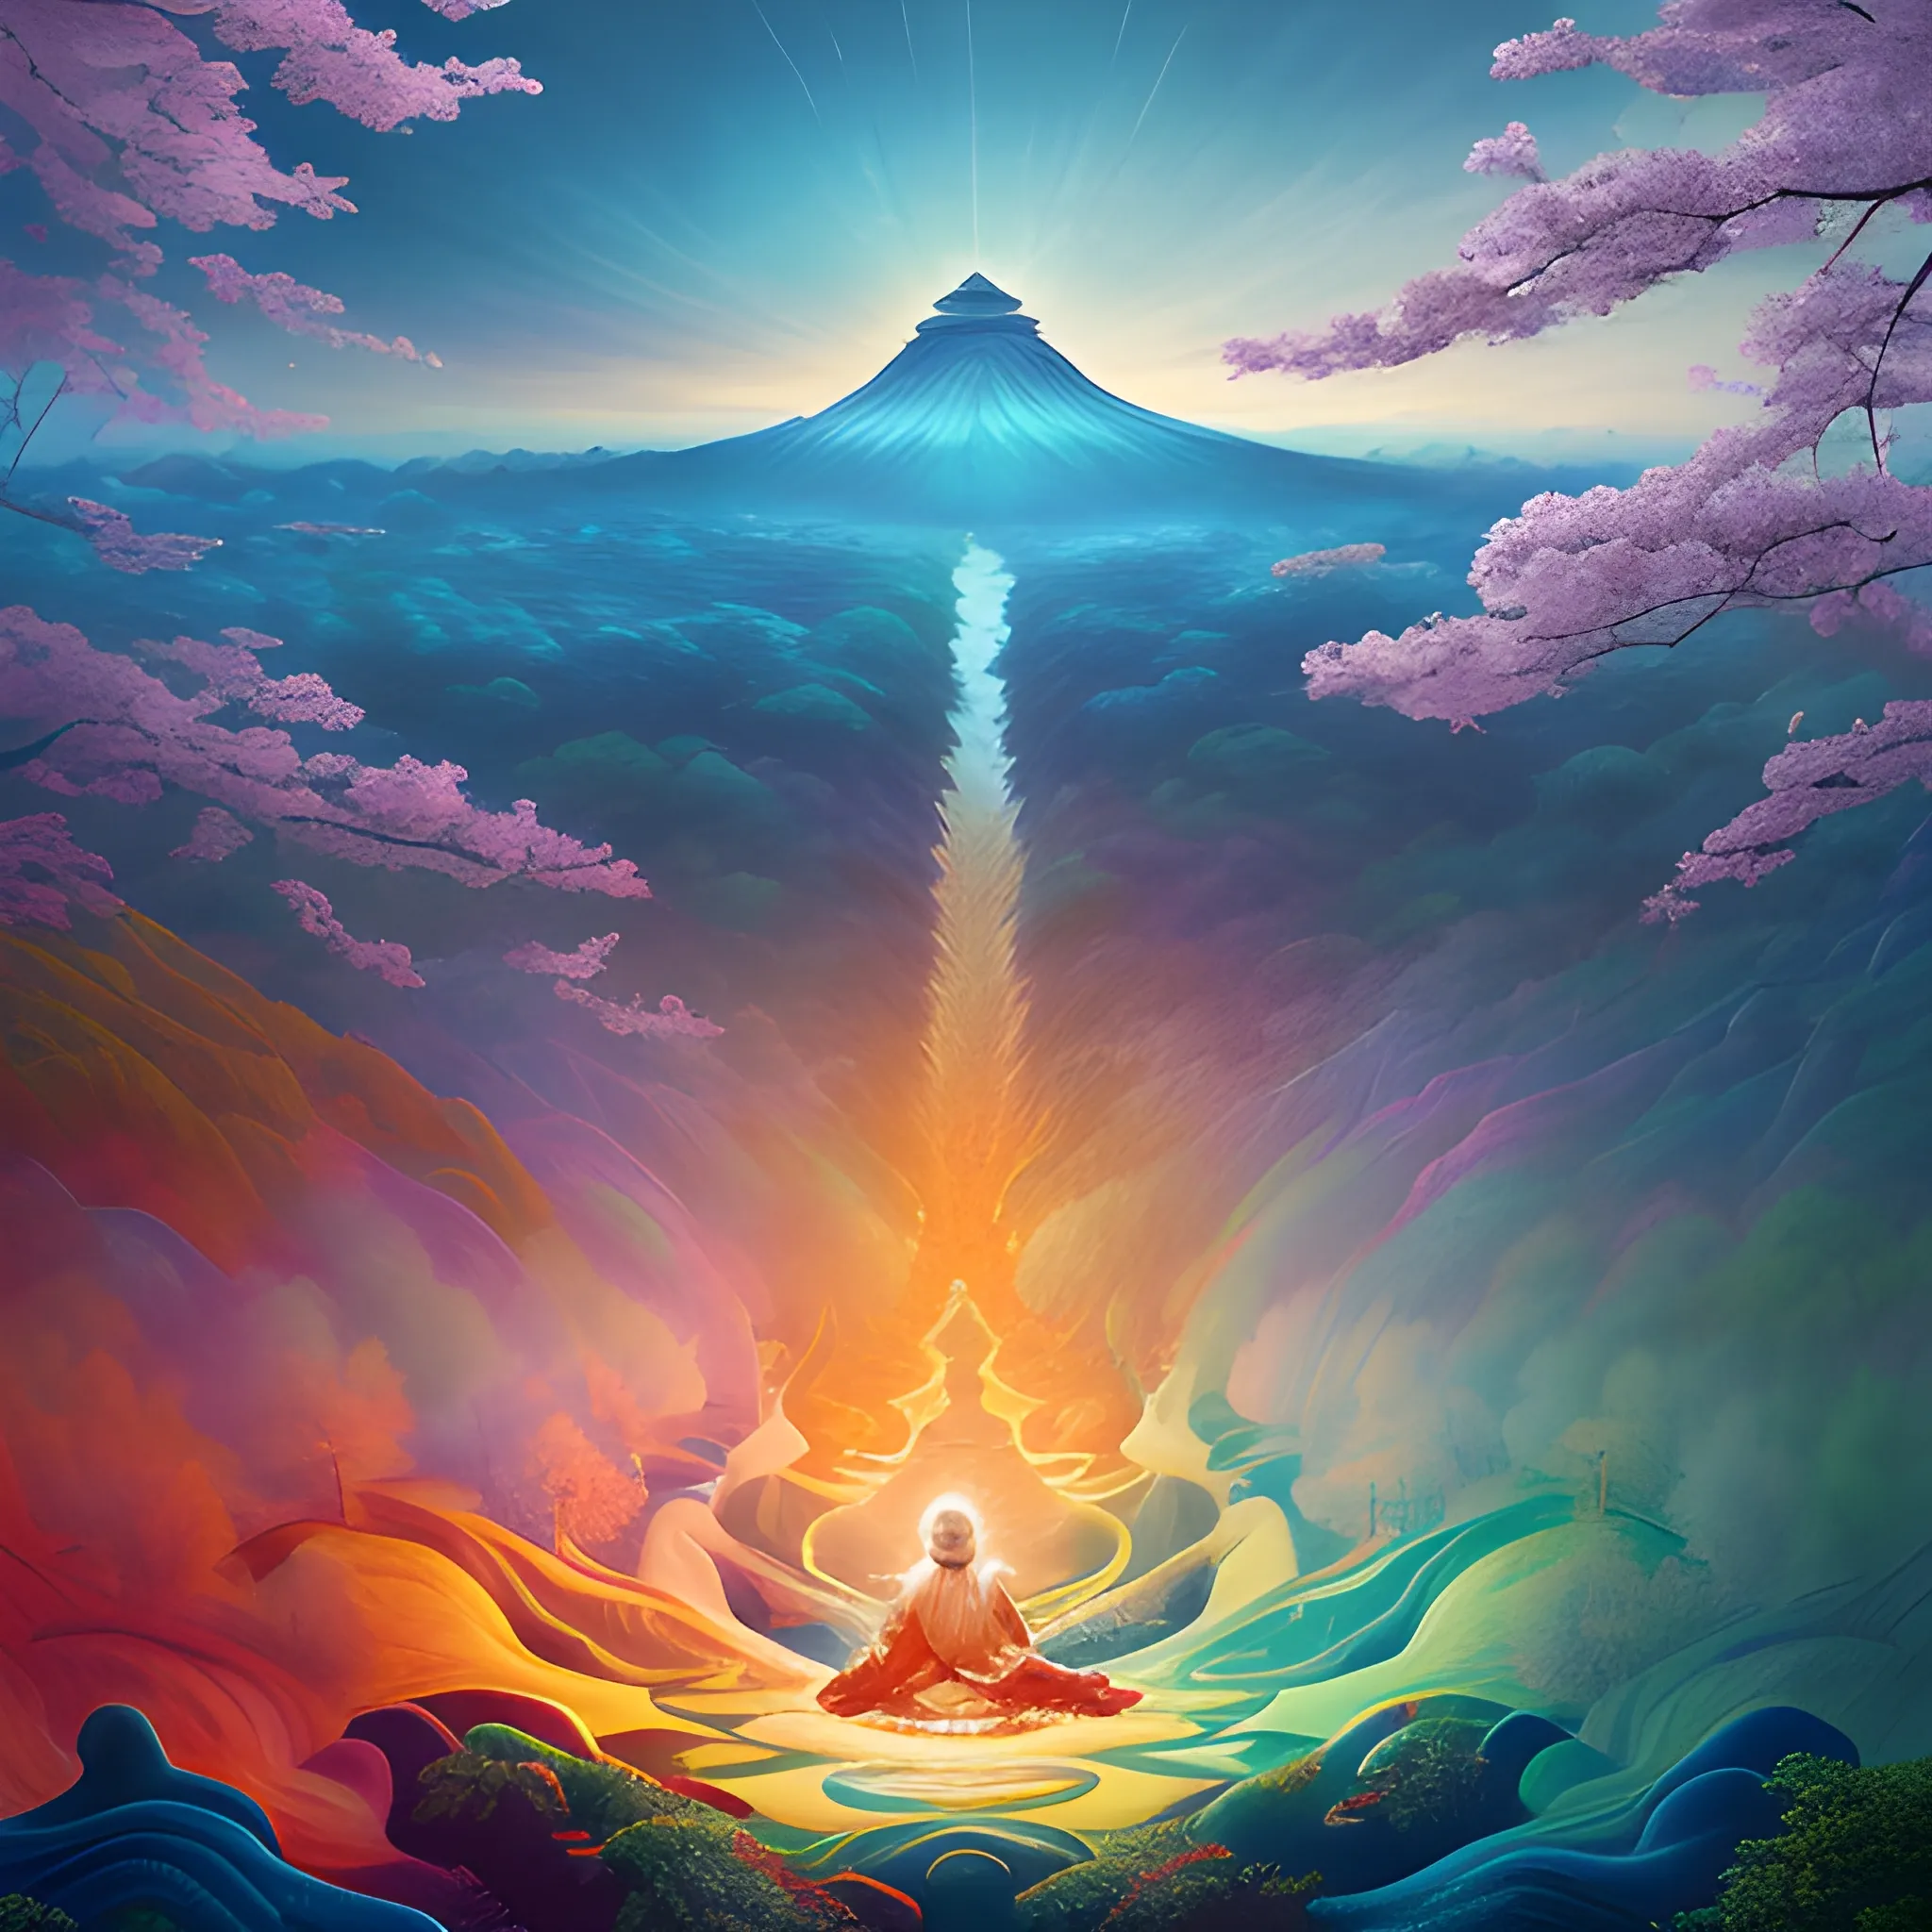 (by Ananta Mandal (and Andrew Biraj:0.5)), (in the style of nihonga), Style: Abstract, Medium: Digital illustration, Subject: A Bodhisattva of Compassion in the middle of picture, An otherworldly landscape with floating islands, cascading waterfalls, and vibrant flora and fauna. Camera Angle: Overhead shot capturing the vastness and intricate details of the scene. The colors are saturated, and the lighting creates a warm and ethereal atmosphere. The painting is highly detailed, with every brushstroke capturing the complexity of the imaginary world., (high quality), (detailed), (masterpiece), (best quality), (highres), (extremely detailed), (8k)